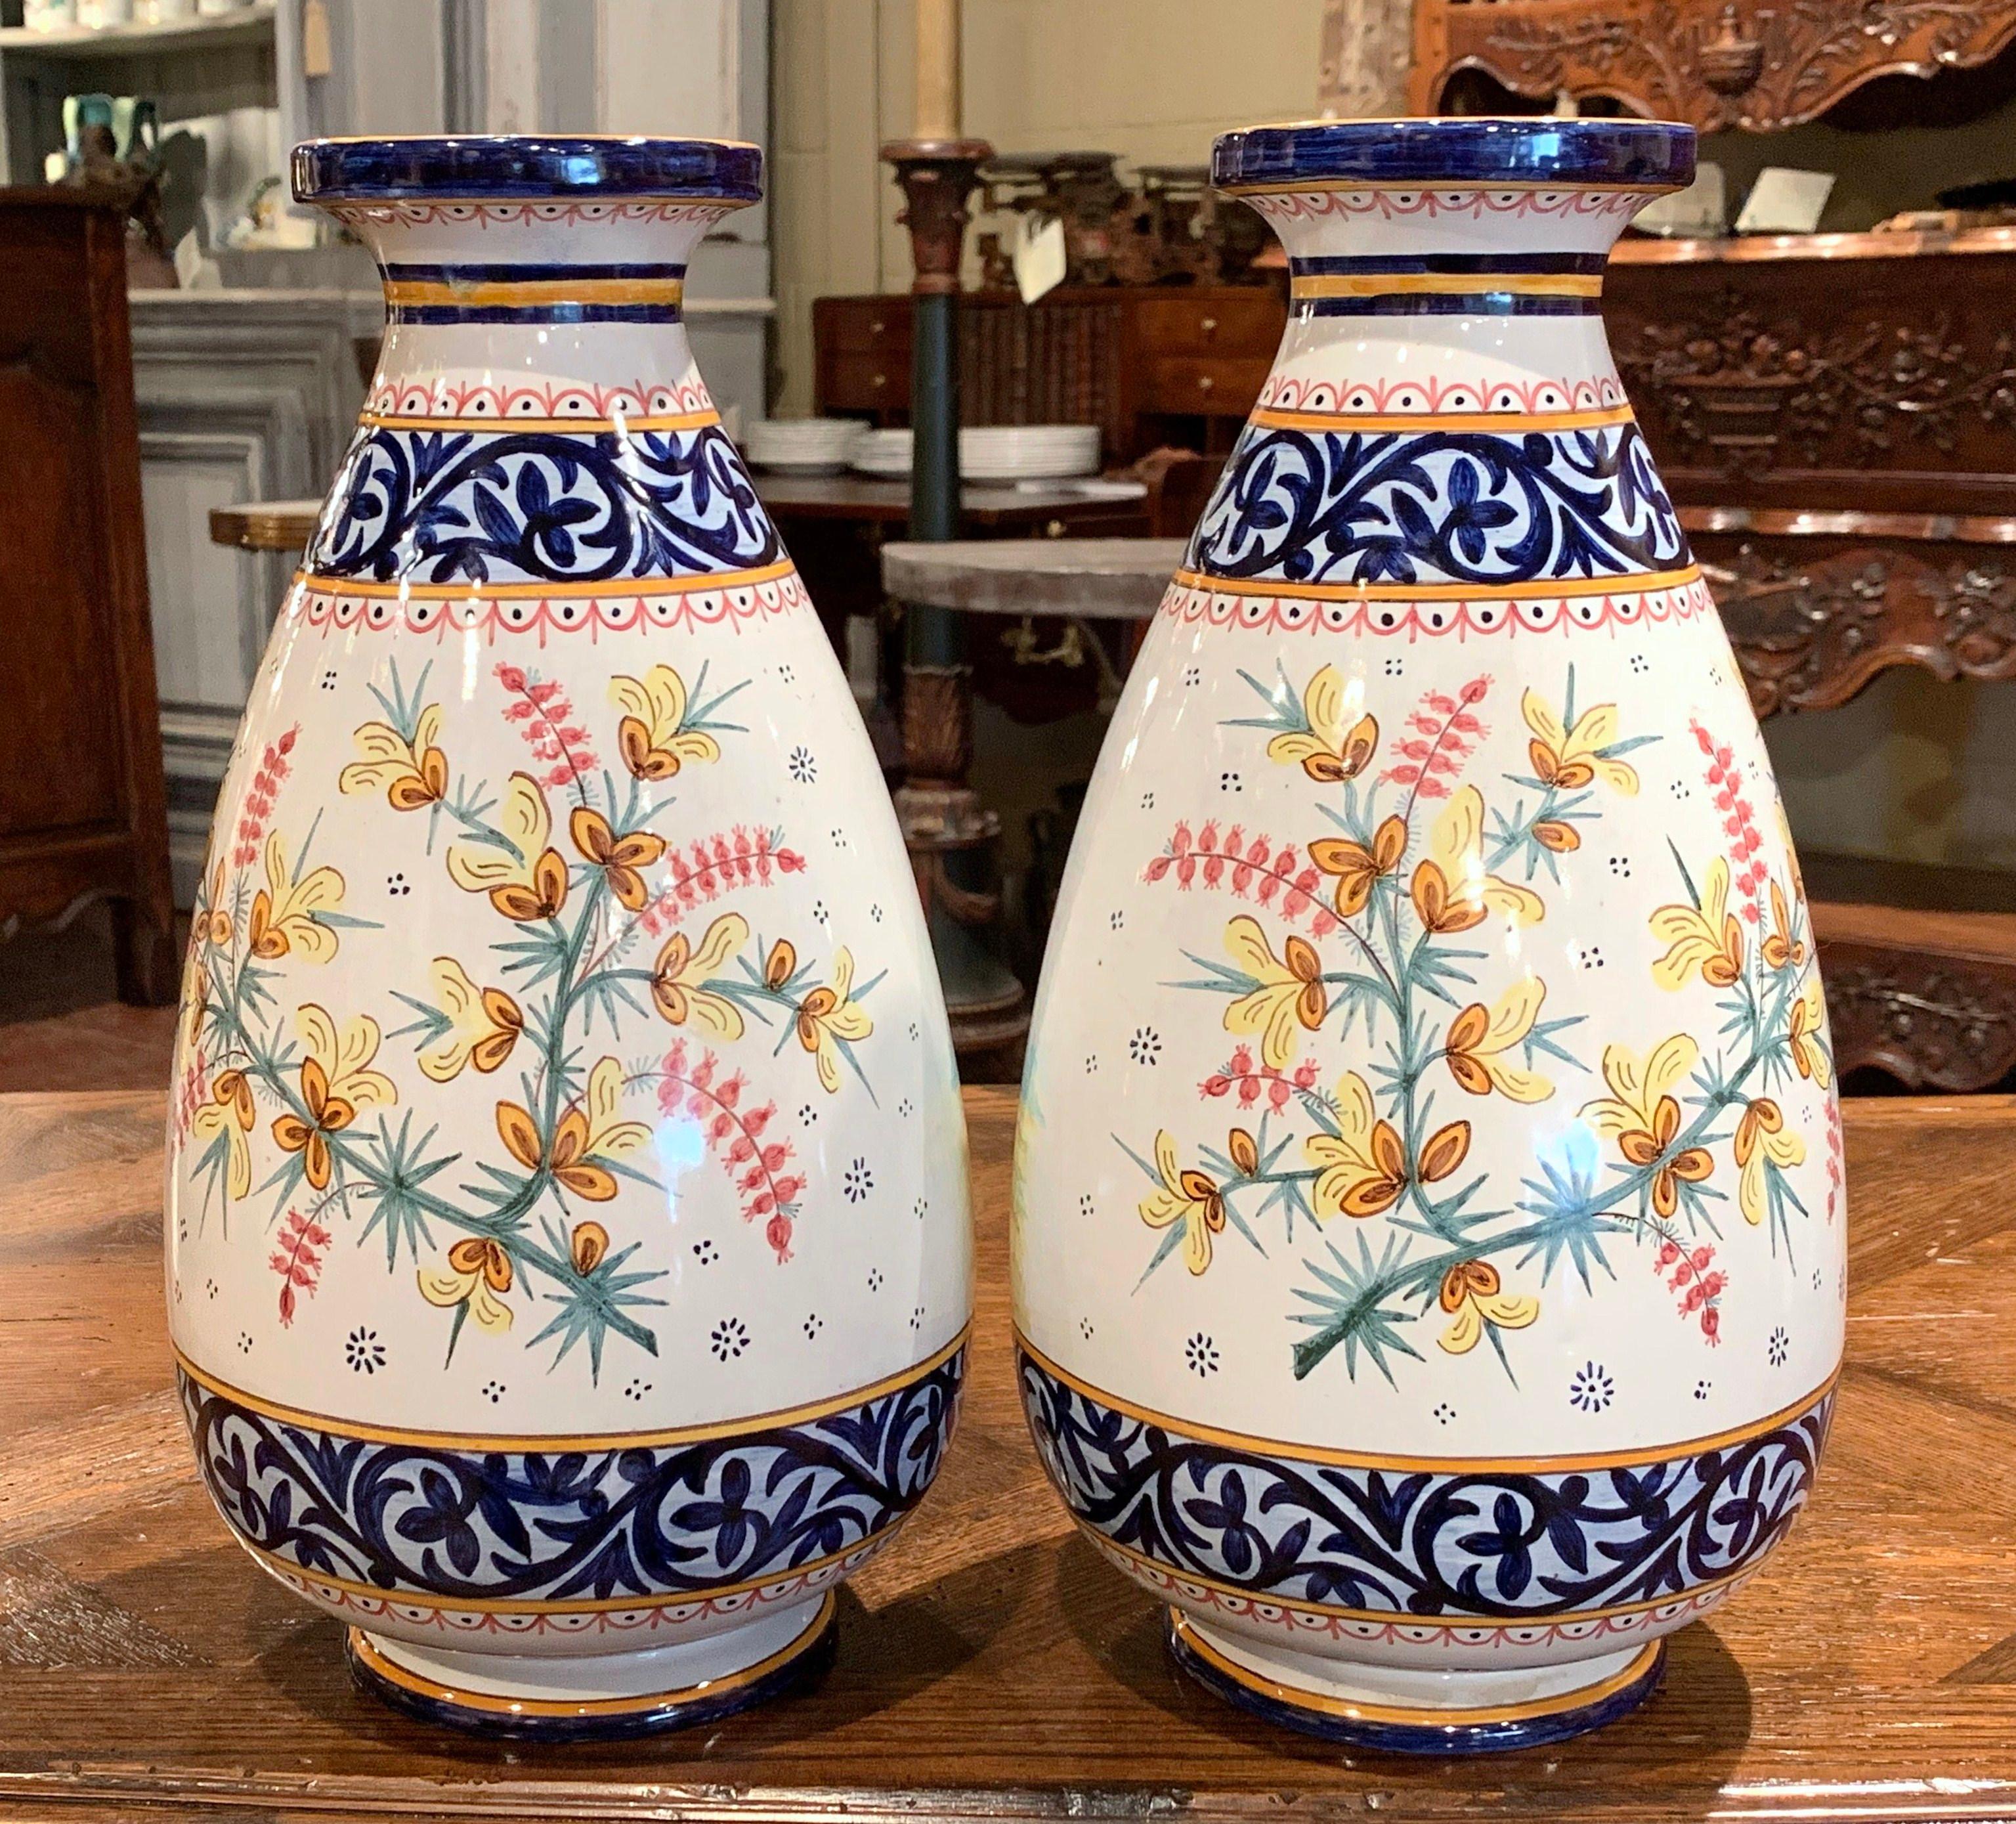 Ceramic Pair of 19th Century French Hand Painted Faience Vases Signed HB Quimper